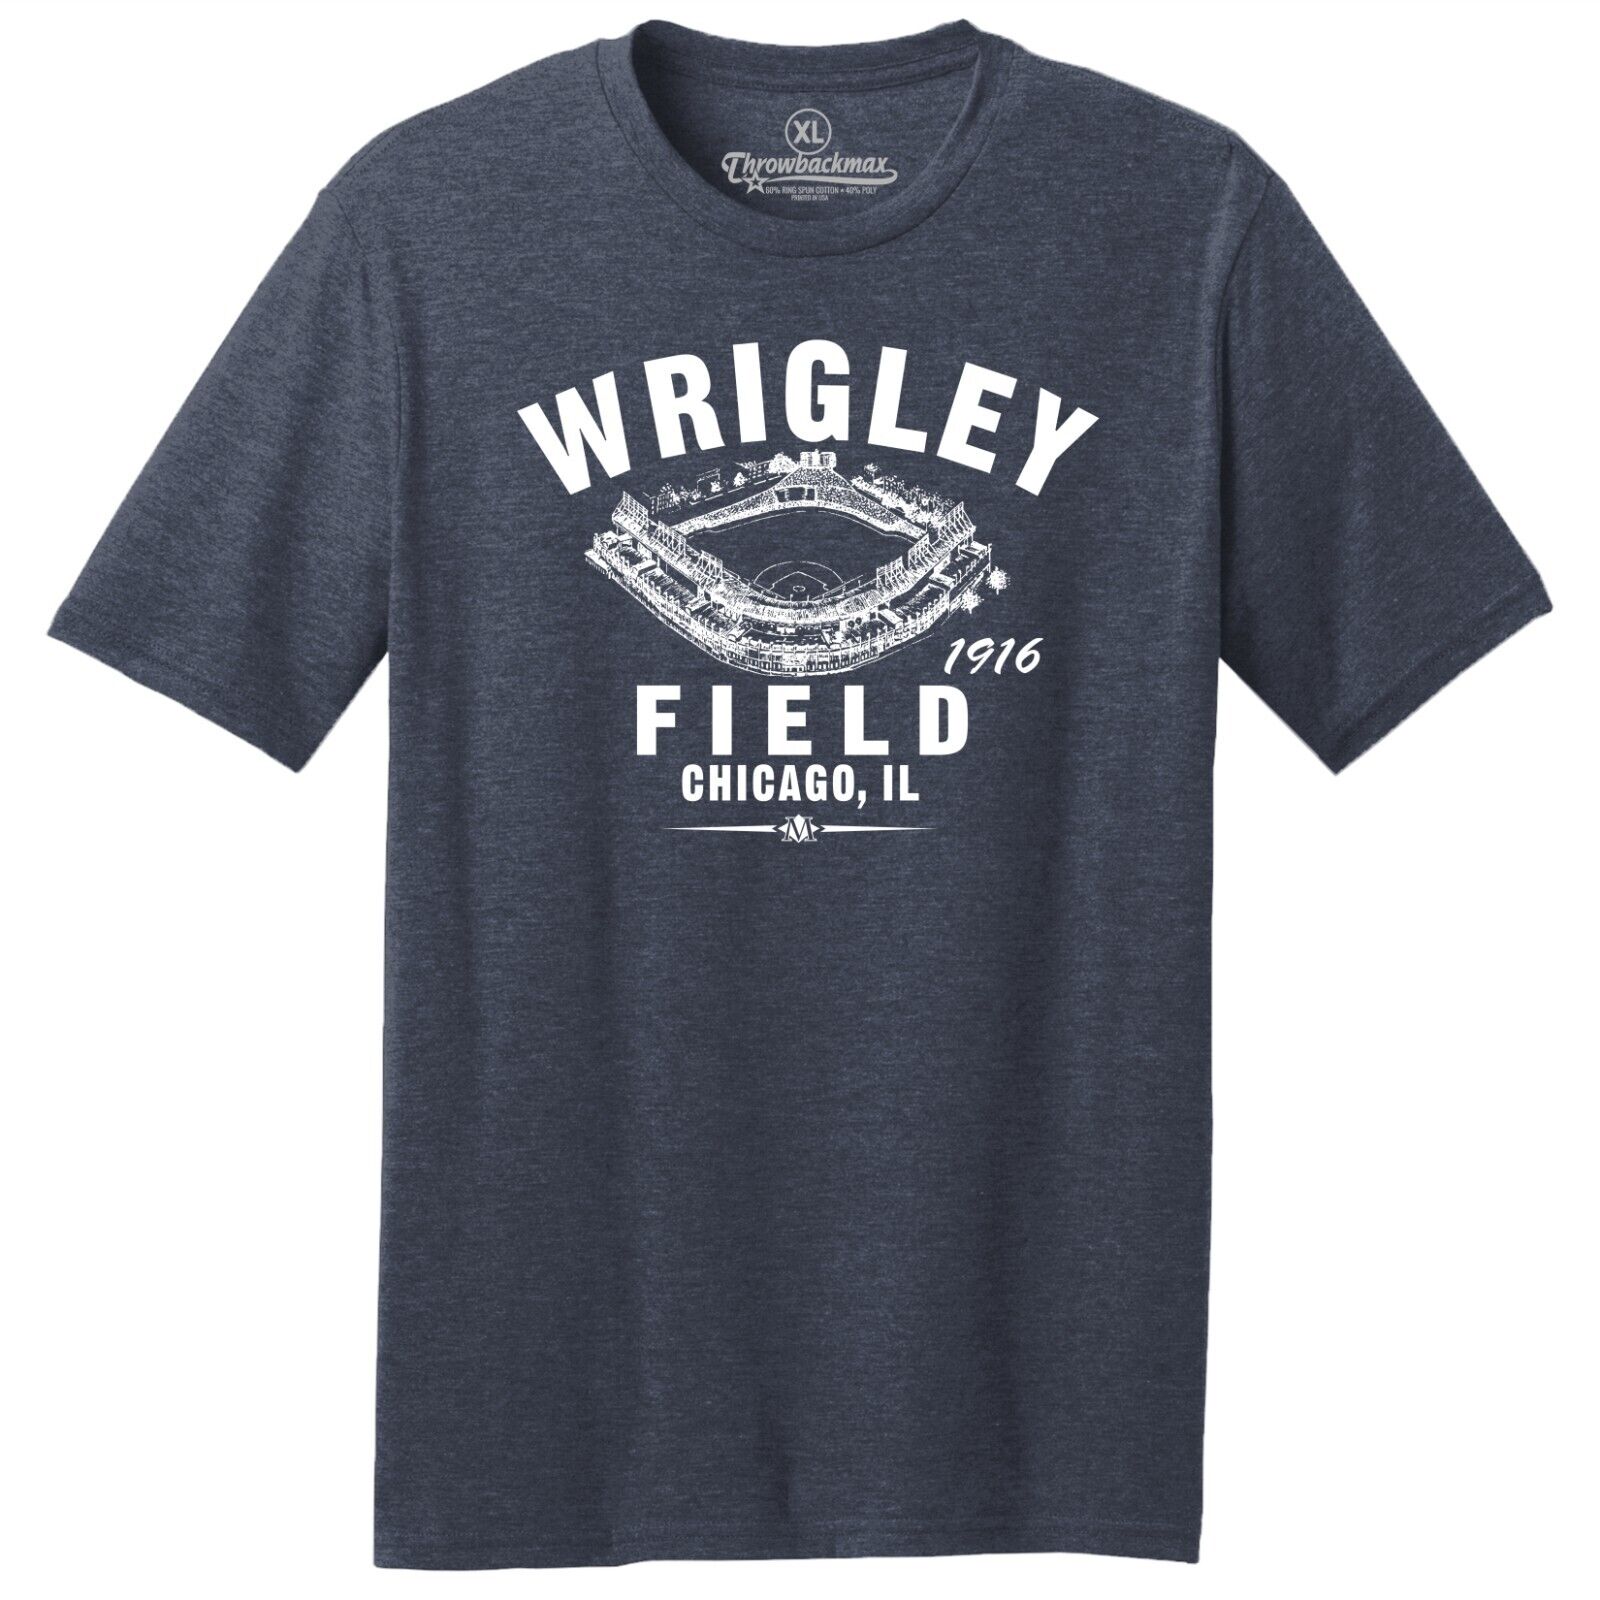 Wrigley Field 1916 Baseball TRI-BLEND Tee Shirt - Home of Your Chicago Cubs